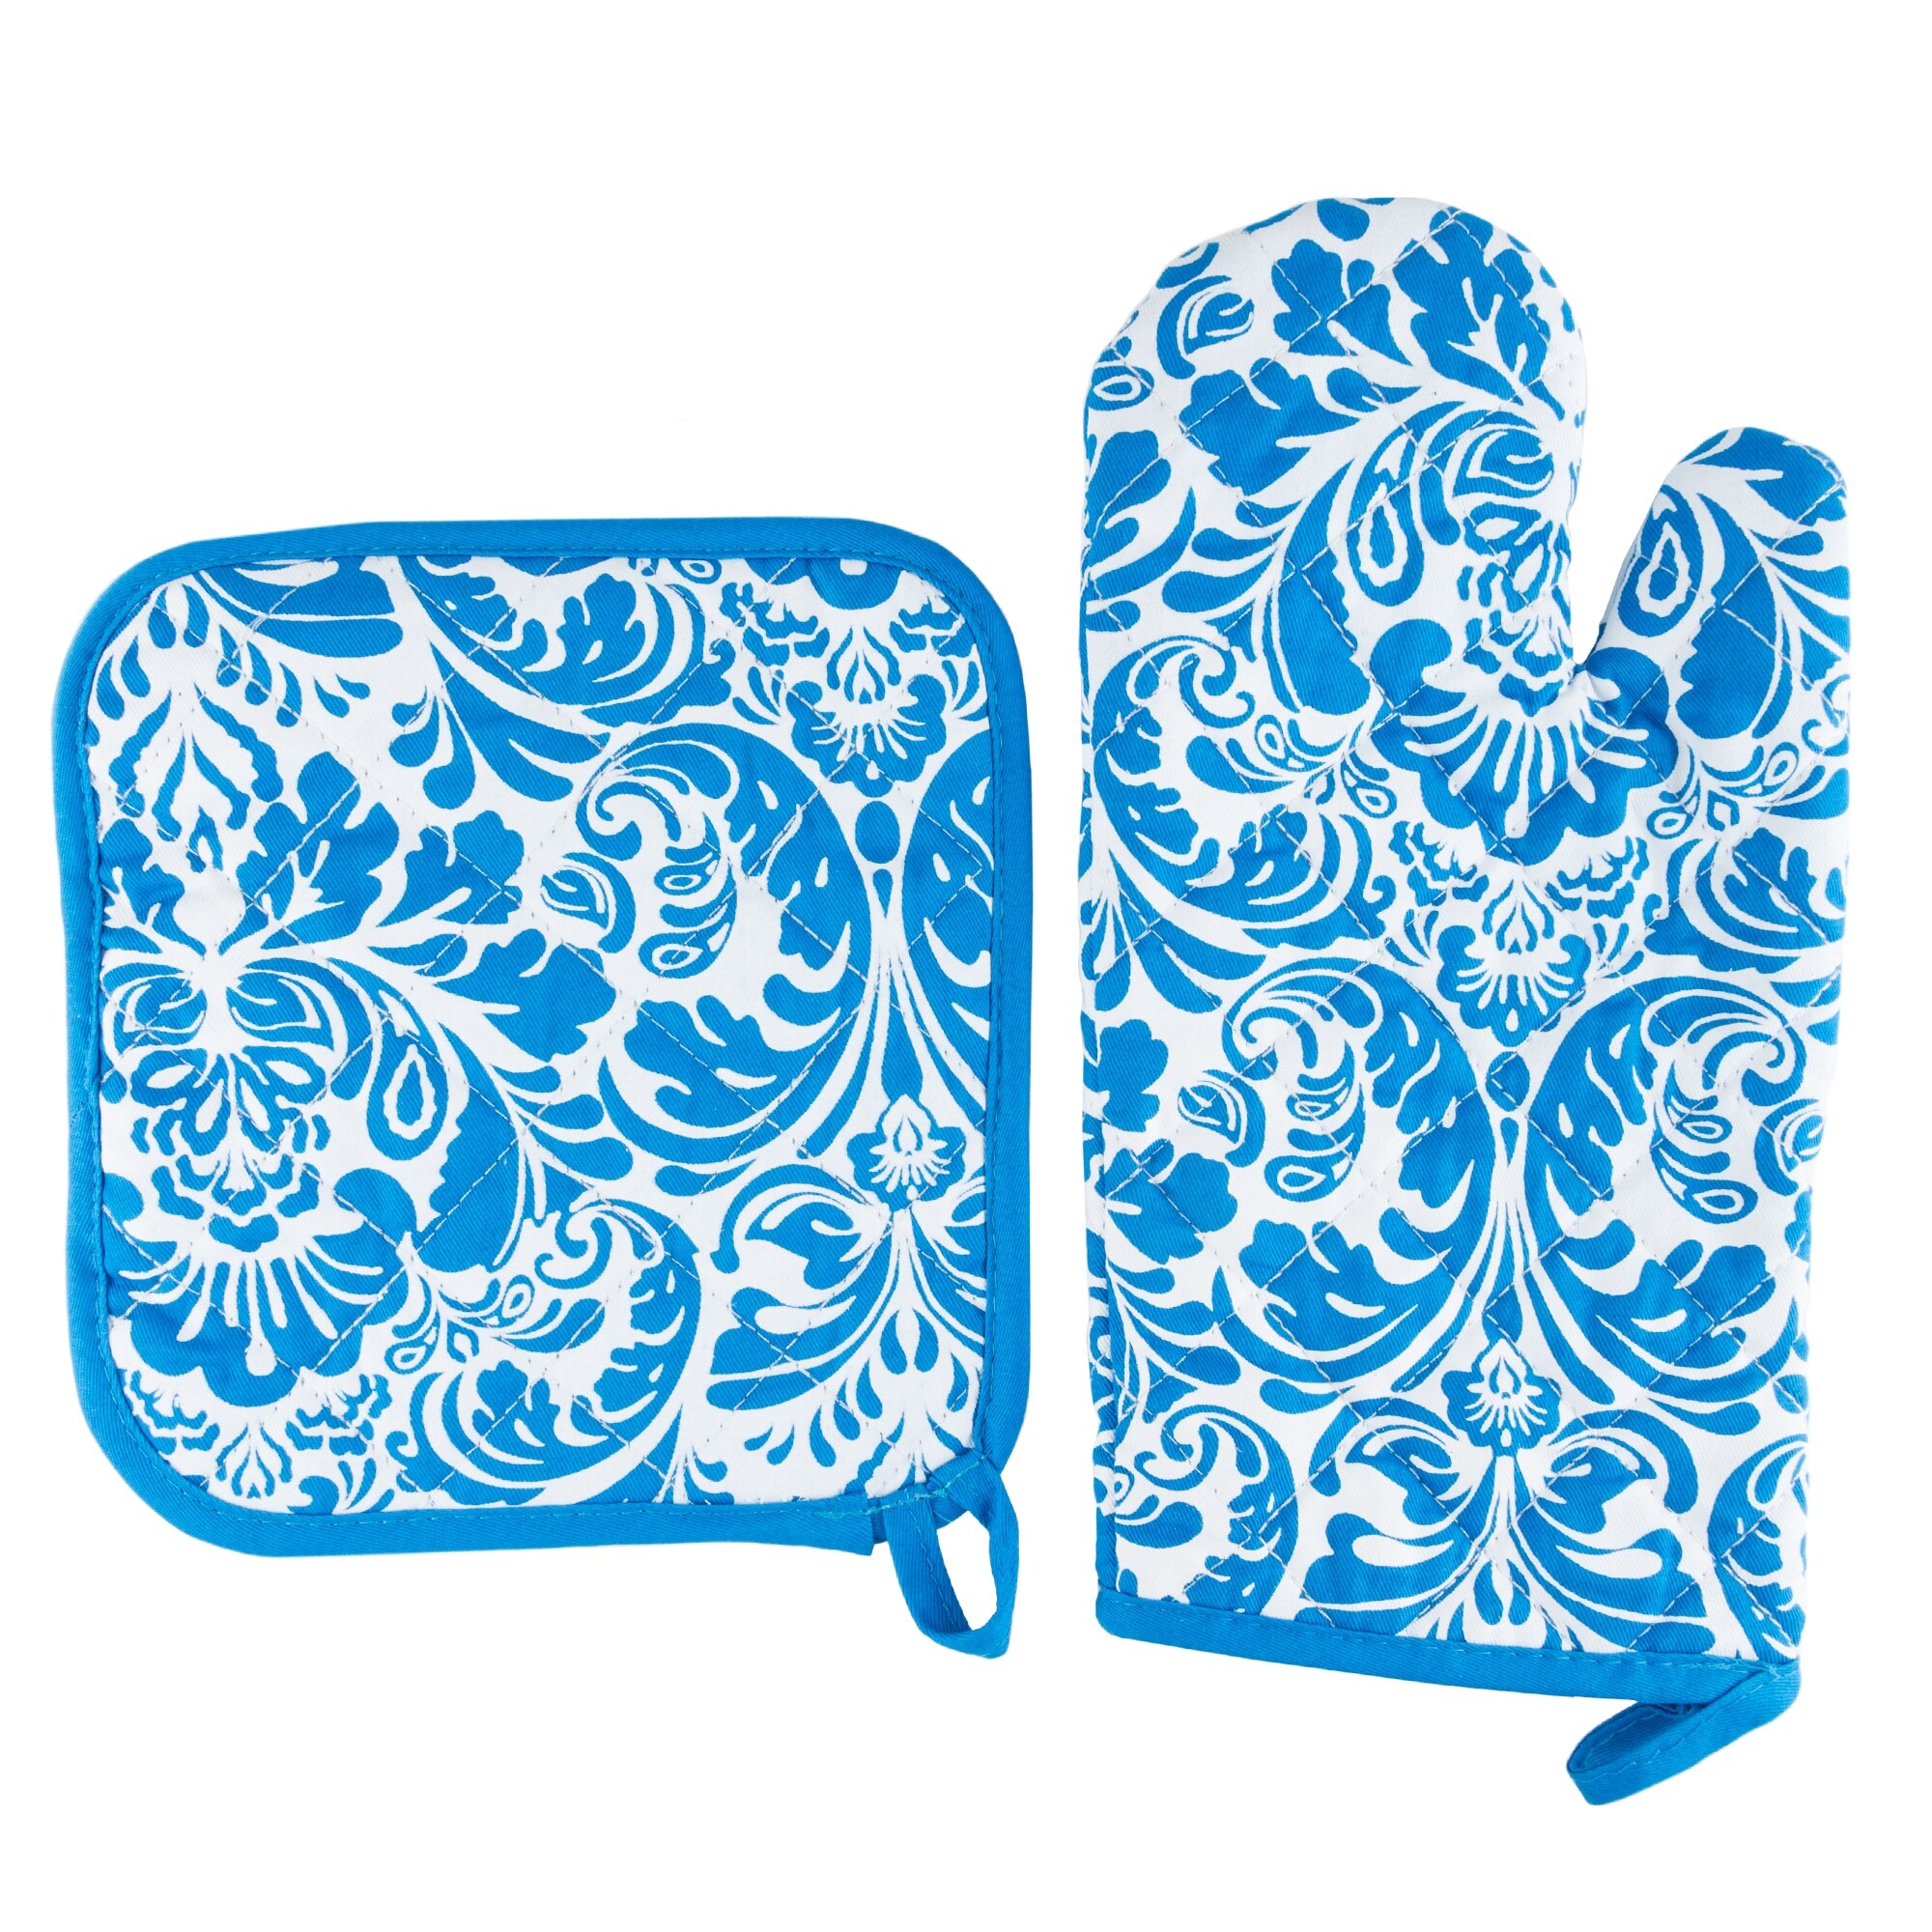 https://ak1.ostkcdn.com/images/products/is/images/direct/496df29877bfd5769a35327effdd878c483bdd32/Oven-Mitt-And-Pot-Holder-Set%2C-Quilted-And-Flame-And-Heat-Resistant-By-Windsor-Home.jpg